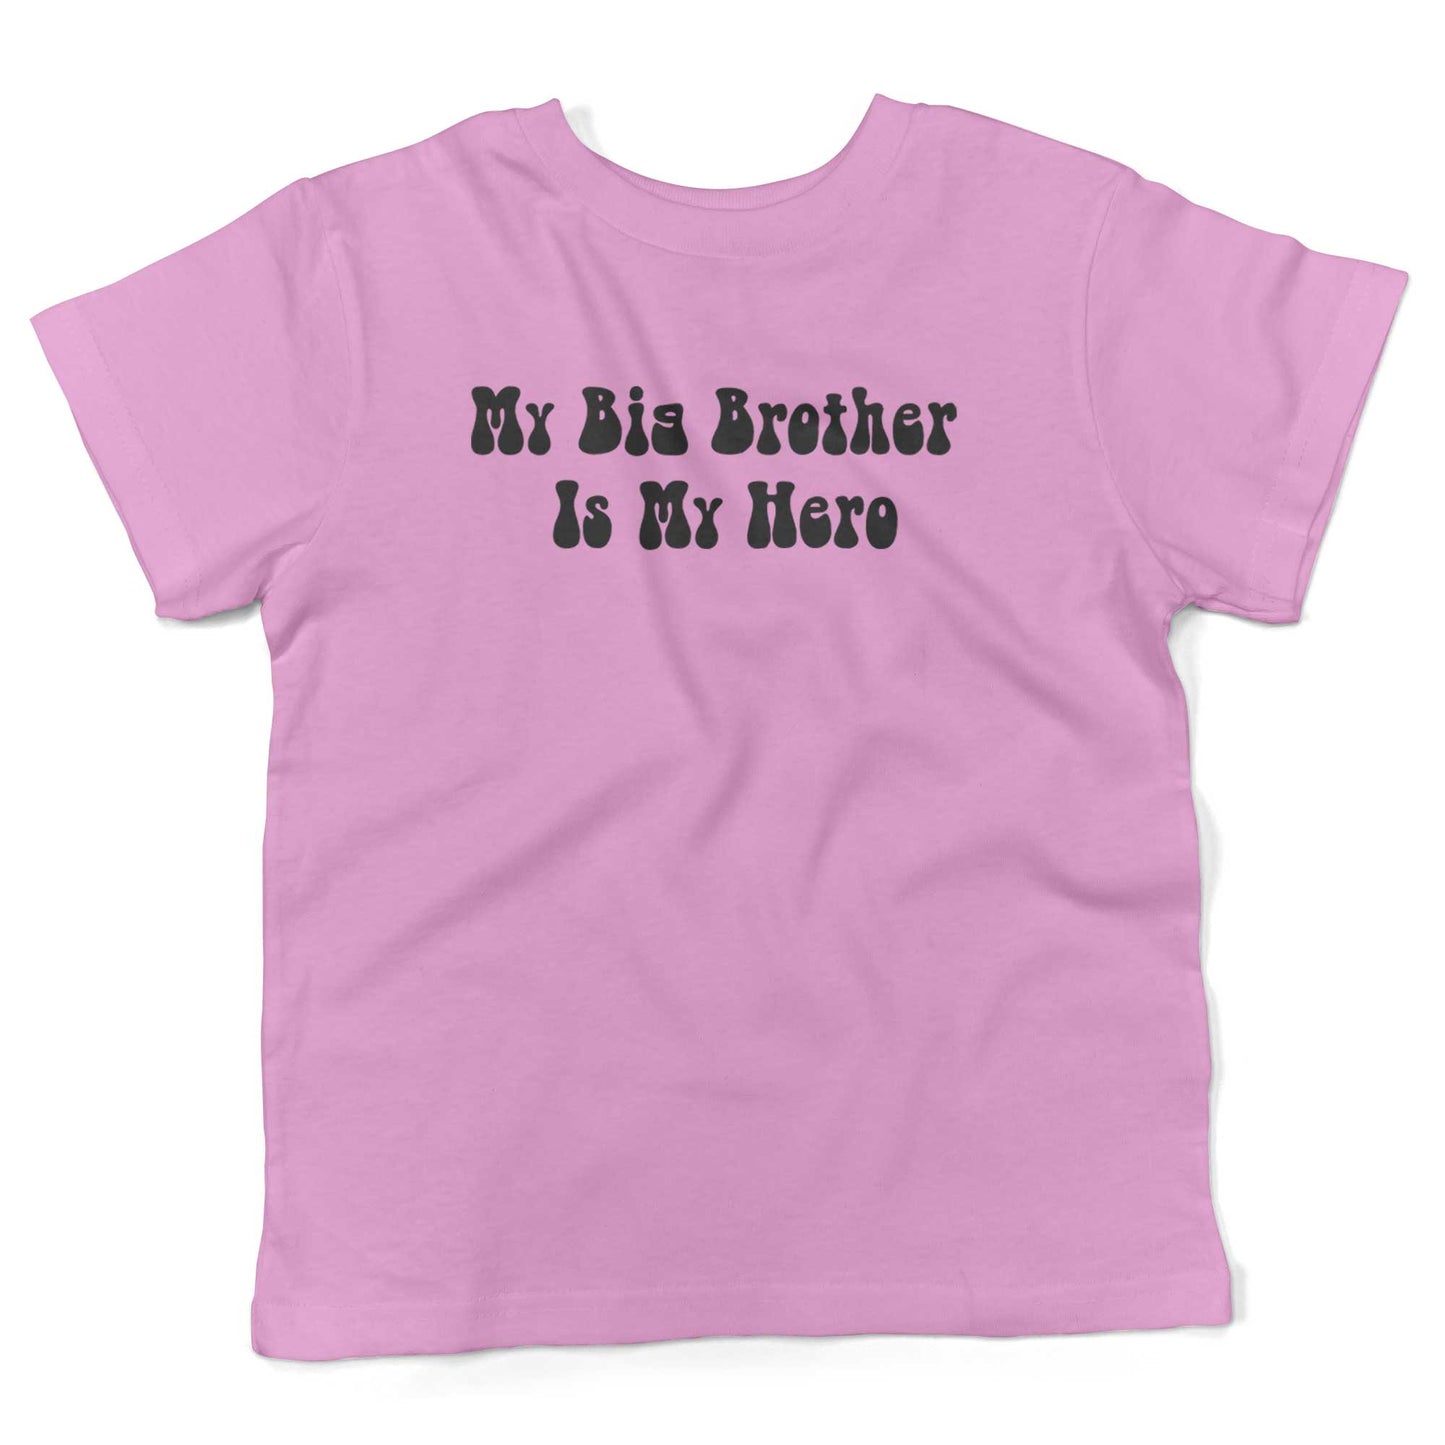 My Big Brother Is My Hero Toddler Shirt-Organic Pink-2T